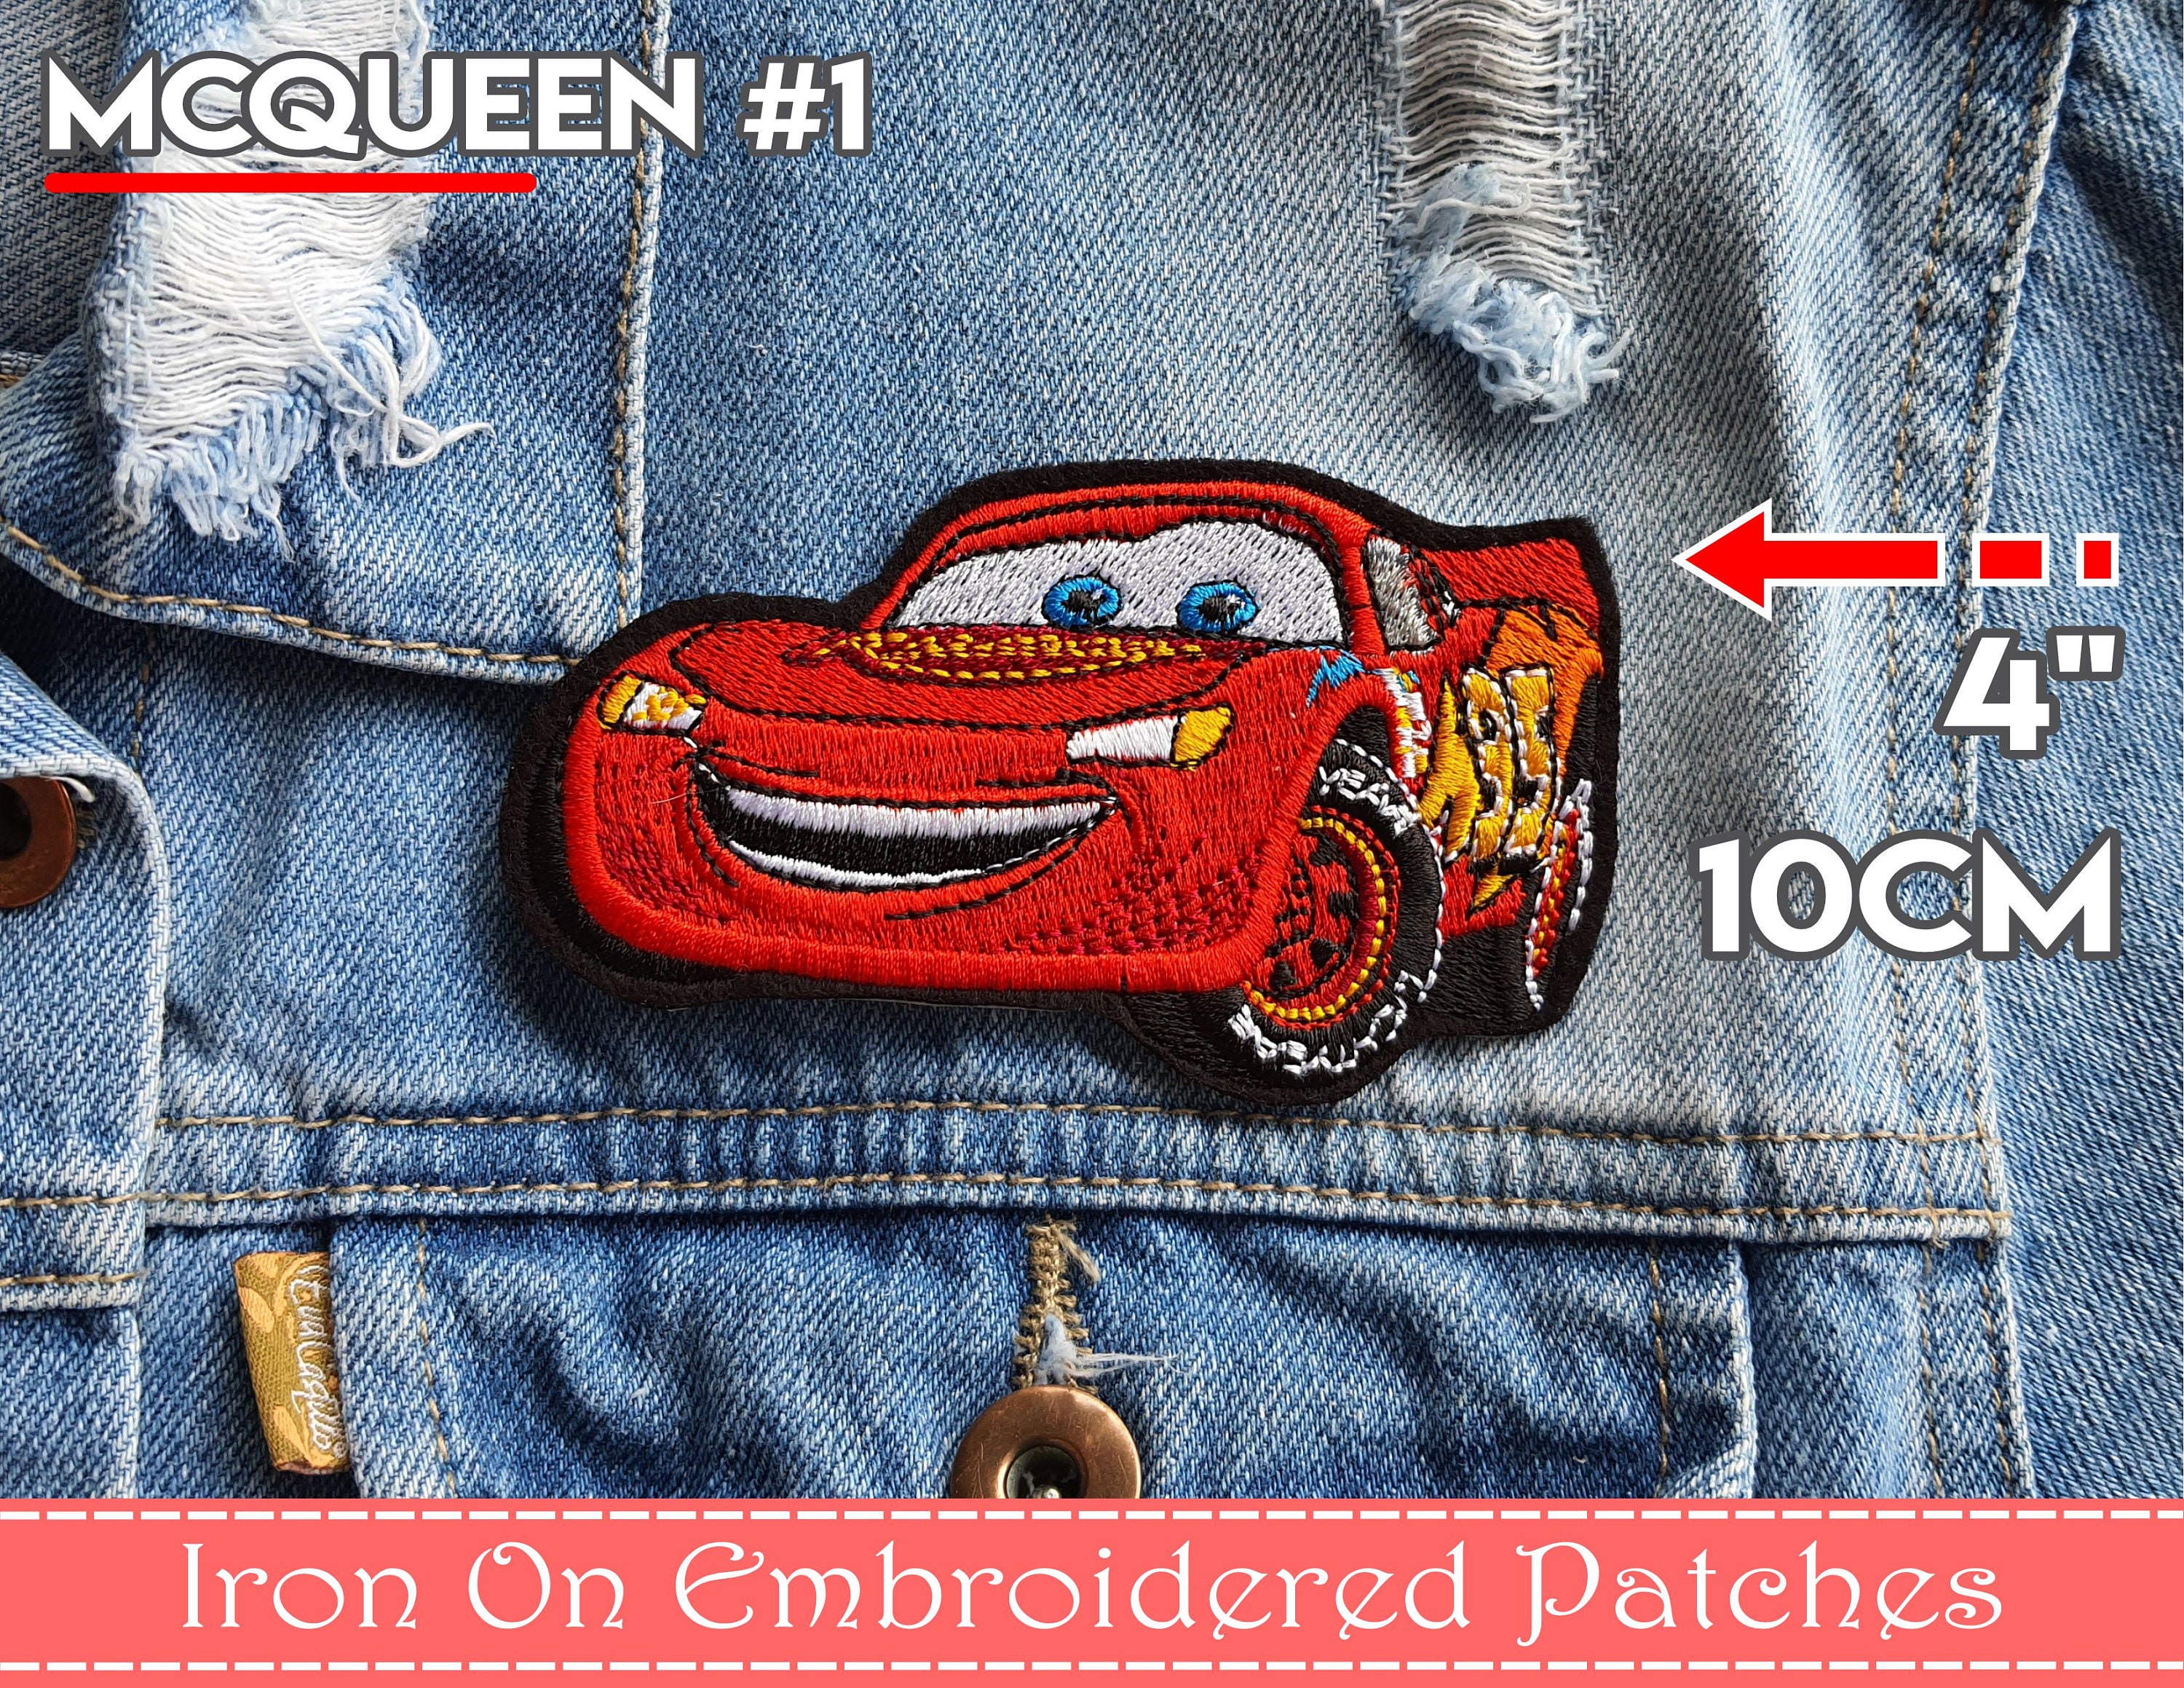 Iron on Embroidered Patches / Mcqueen / Salle / Mate / Cars